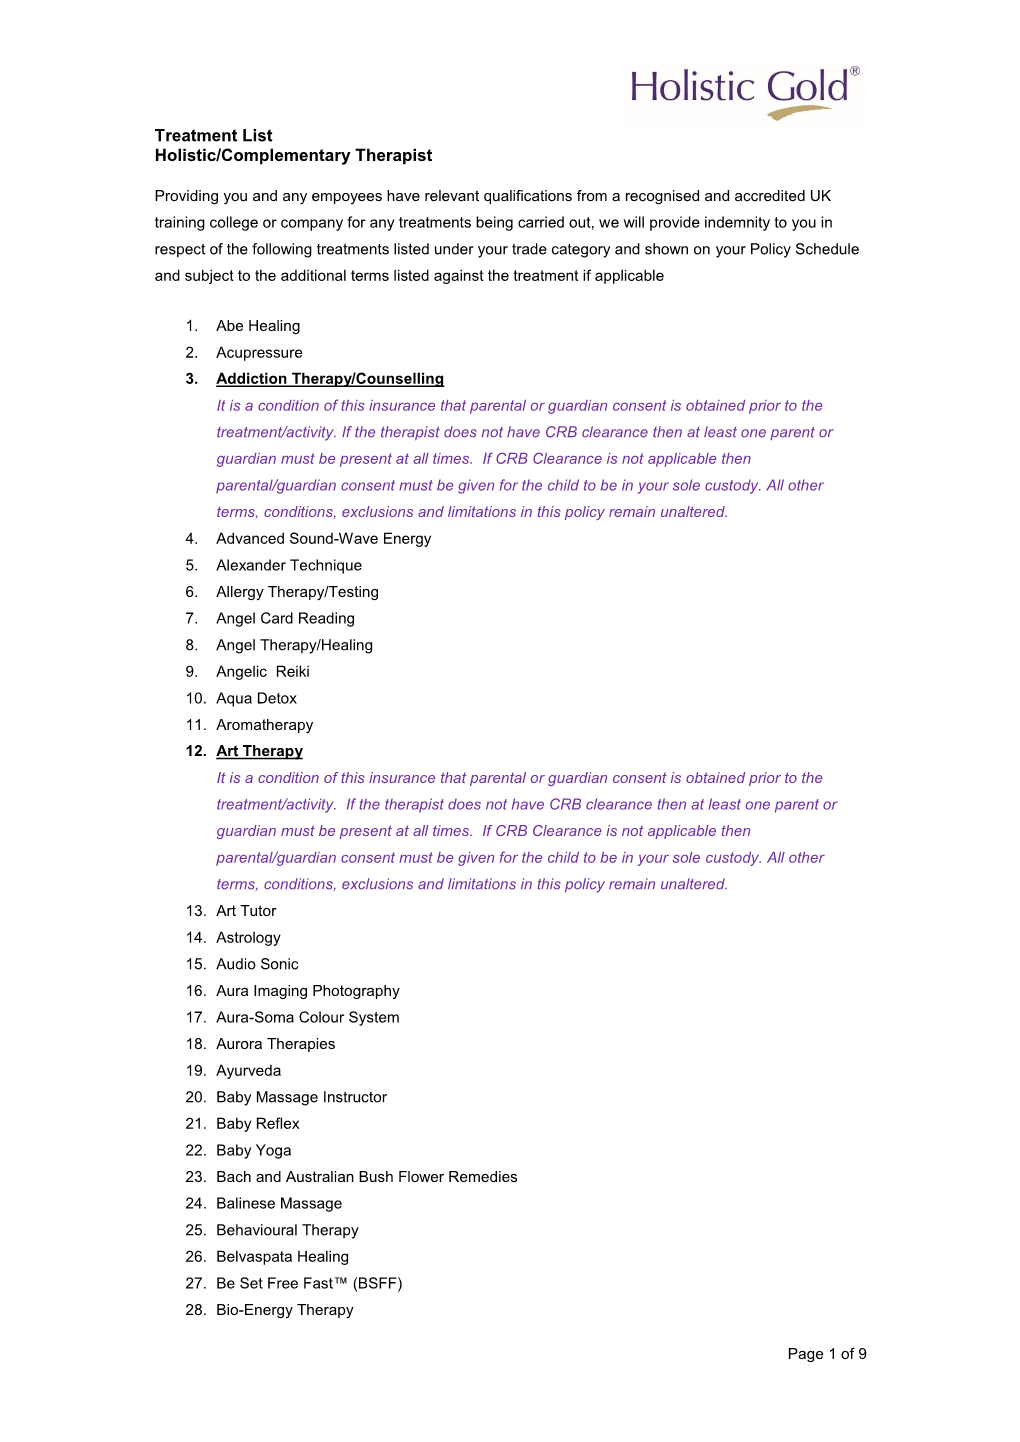 Treatment List Holistic/Complementary Therapist